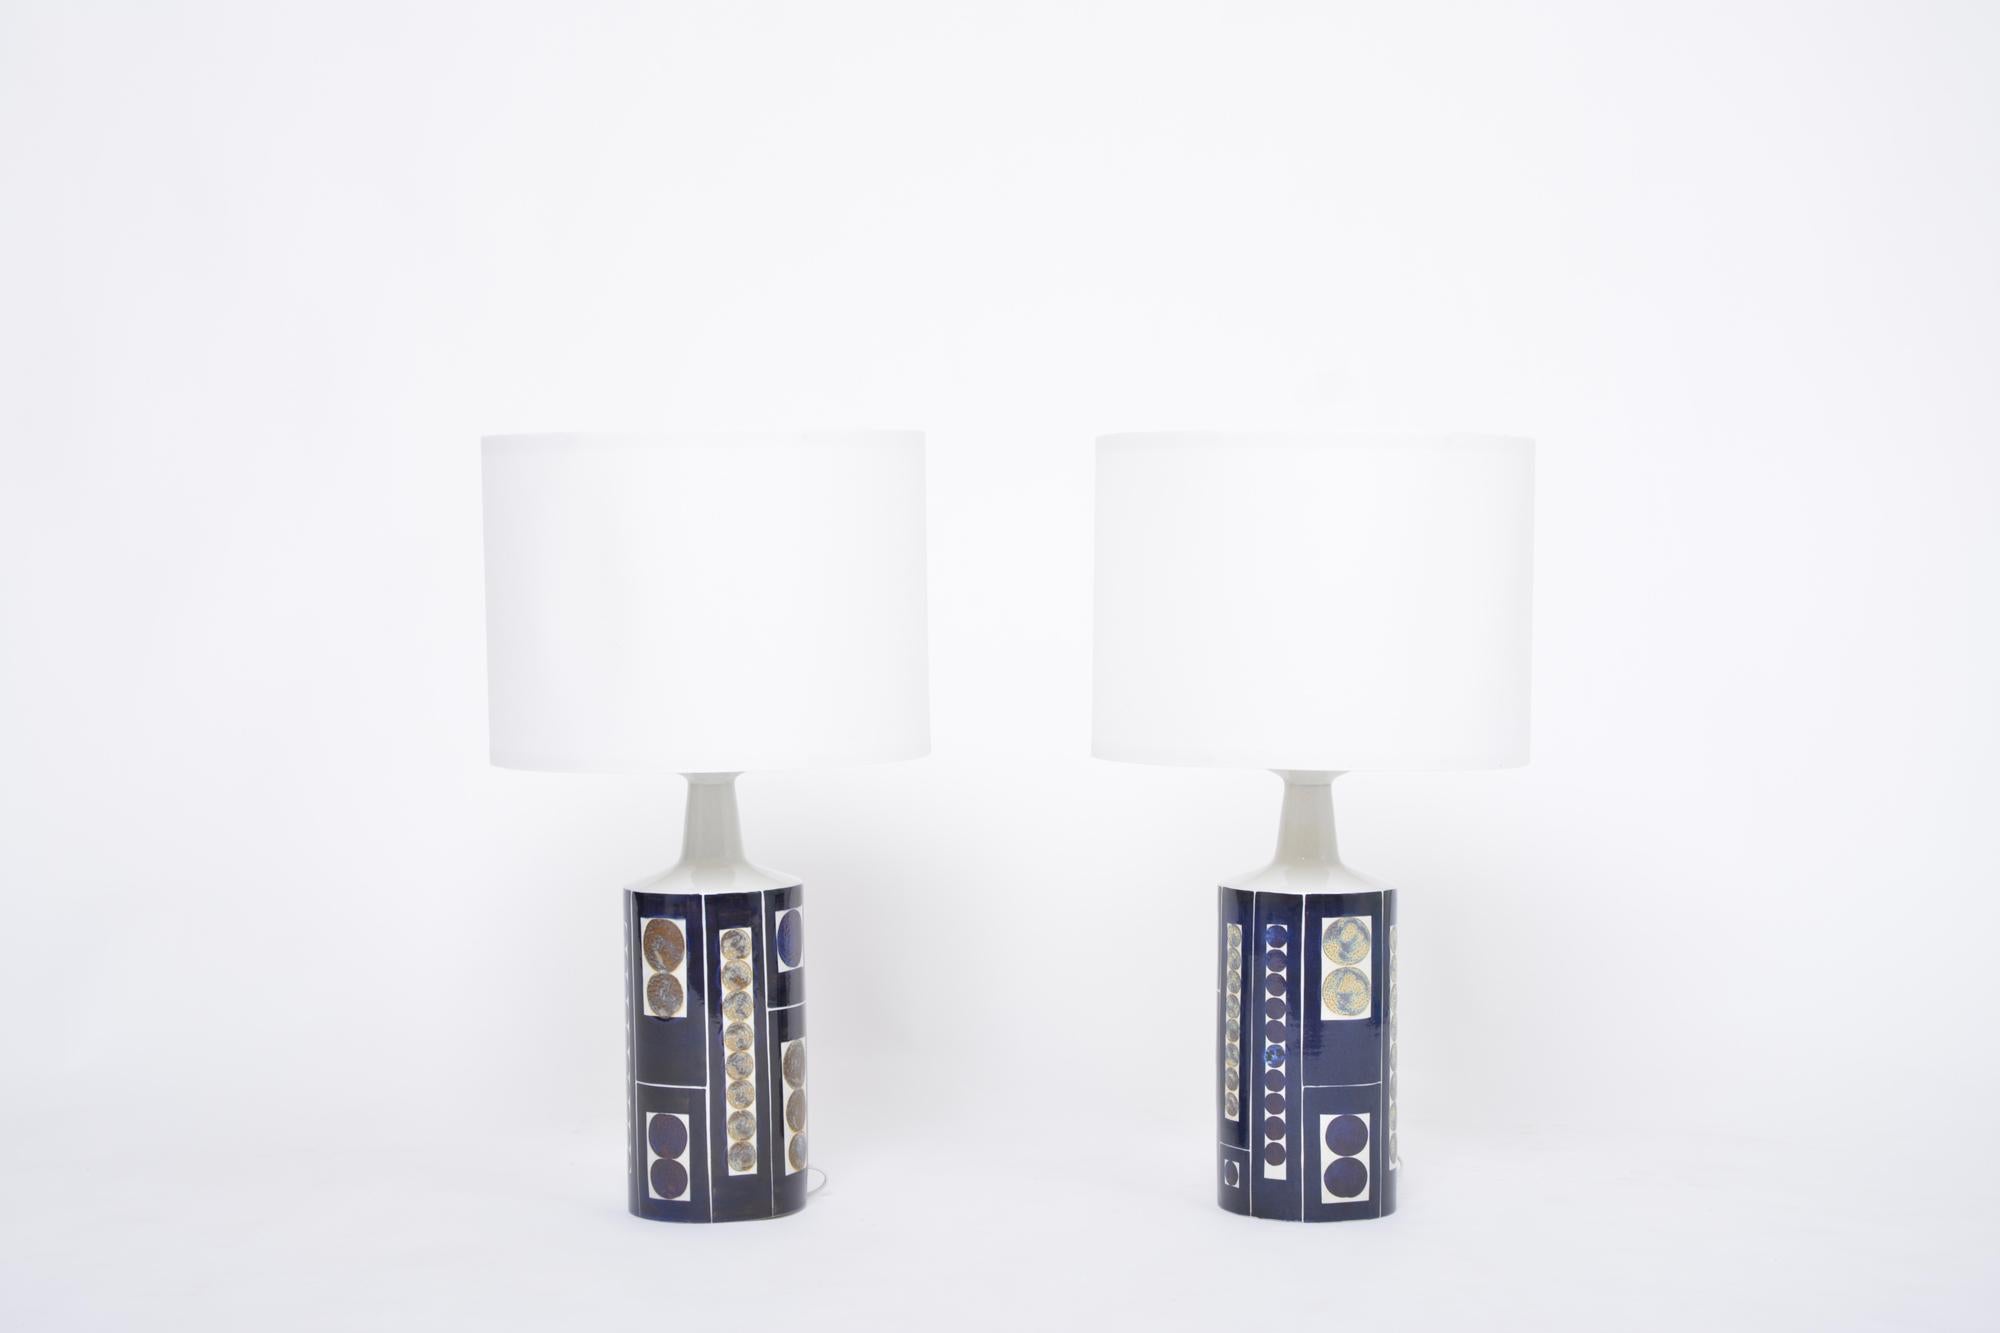 Pair of Royal 7 Midcentury Table Lamps by Ingelise Koefoed for Fog & Mørup
Tall and impressive table lamps with very decorative bold design by Danish artist Inge-Lise Koefoed. The lamp was produced in collaboration of Royal Copenhagen with the